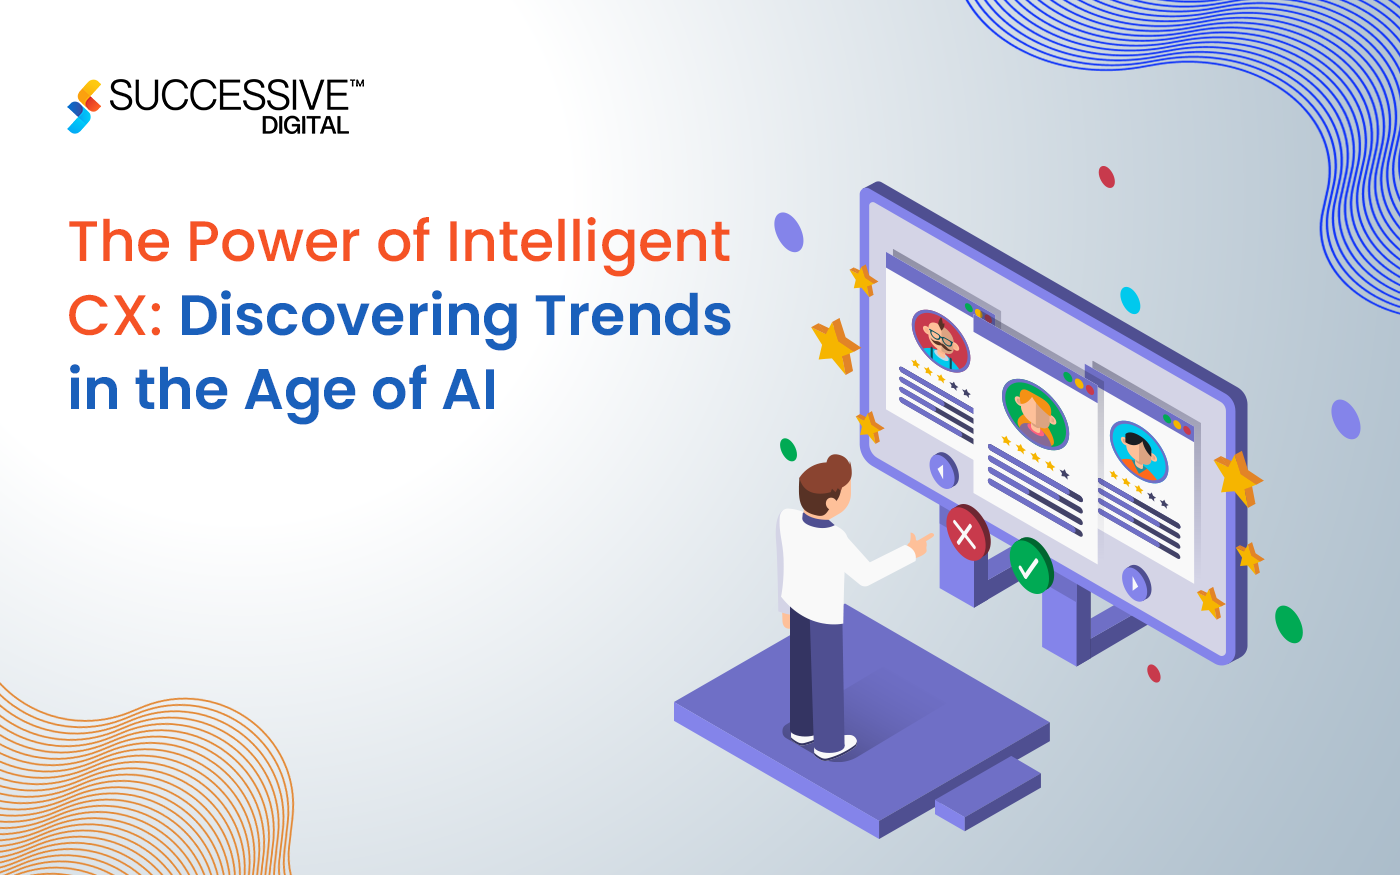 The Power of Intelligent CX: Discovering Trends in the Age of AI